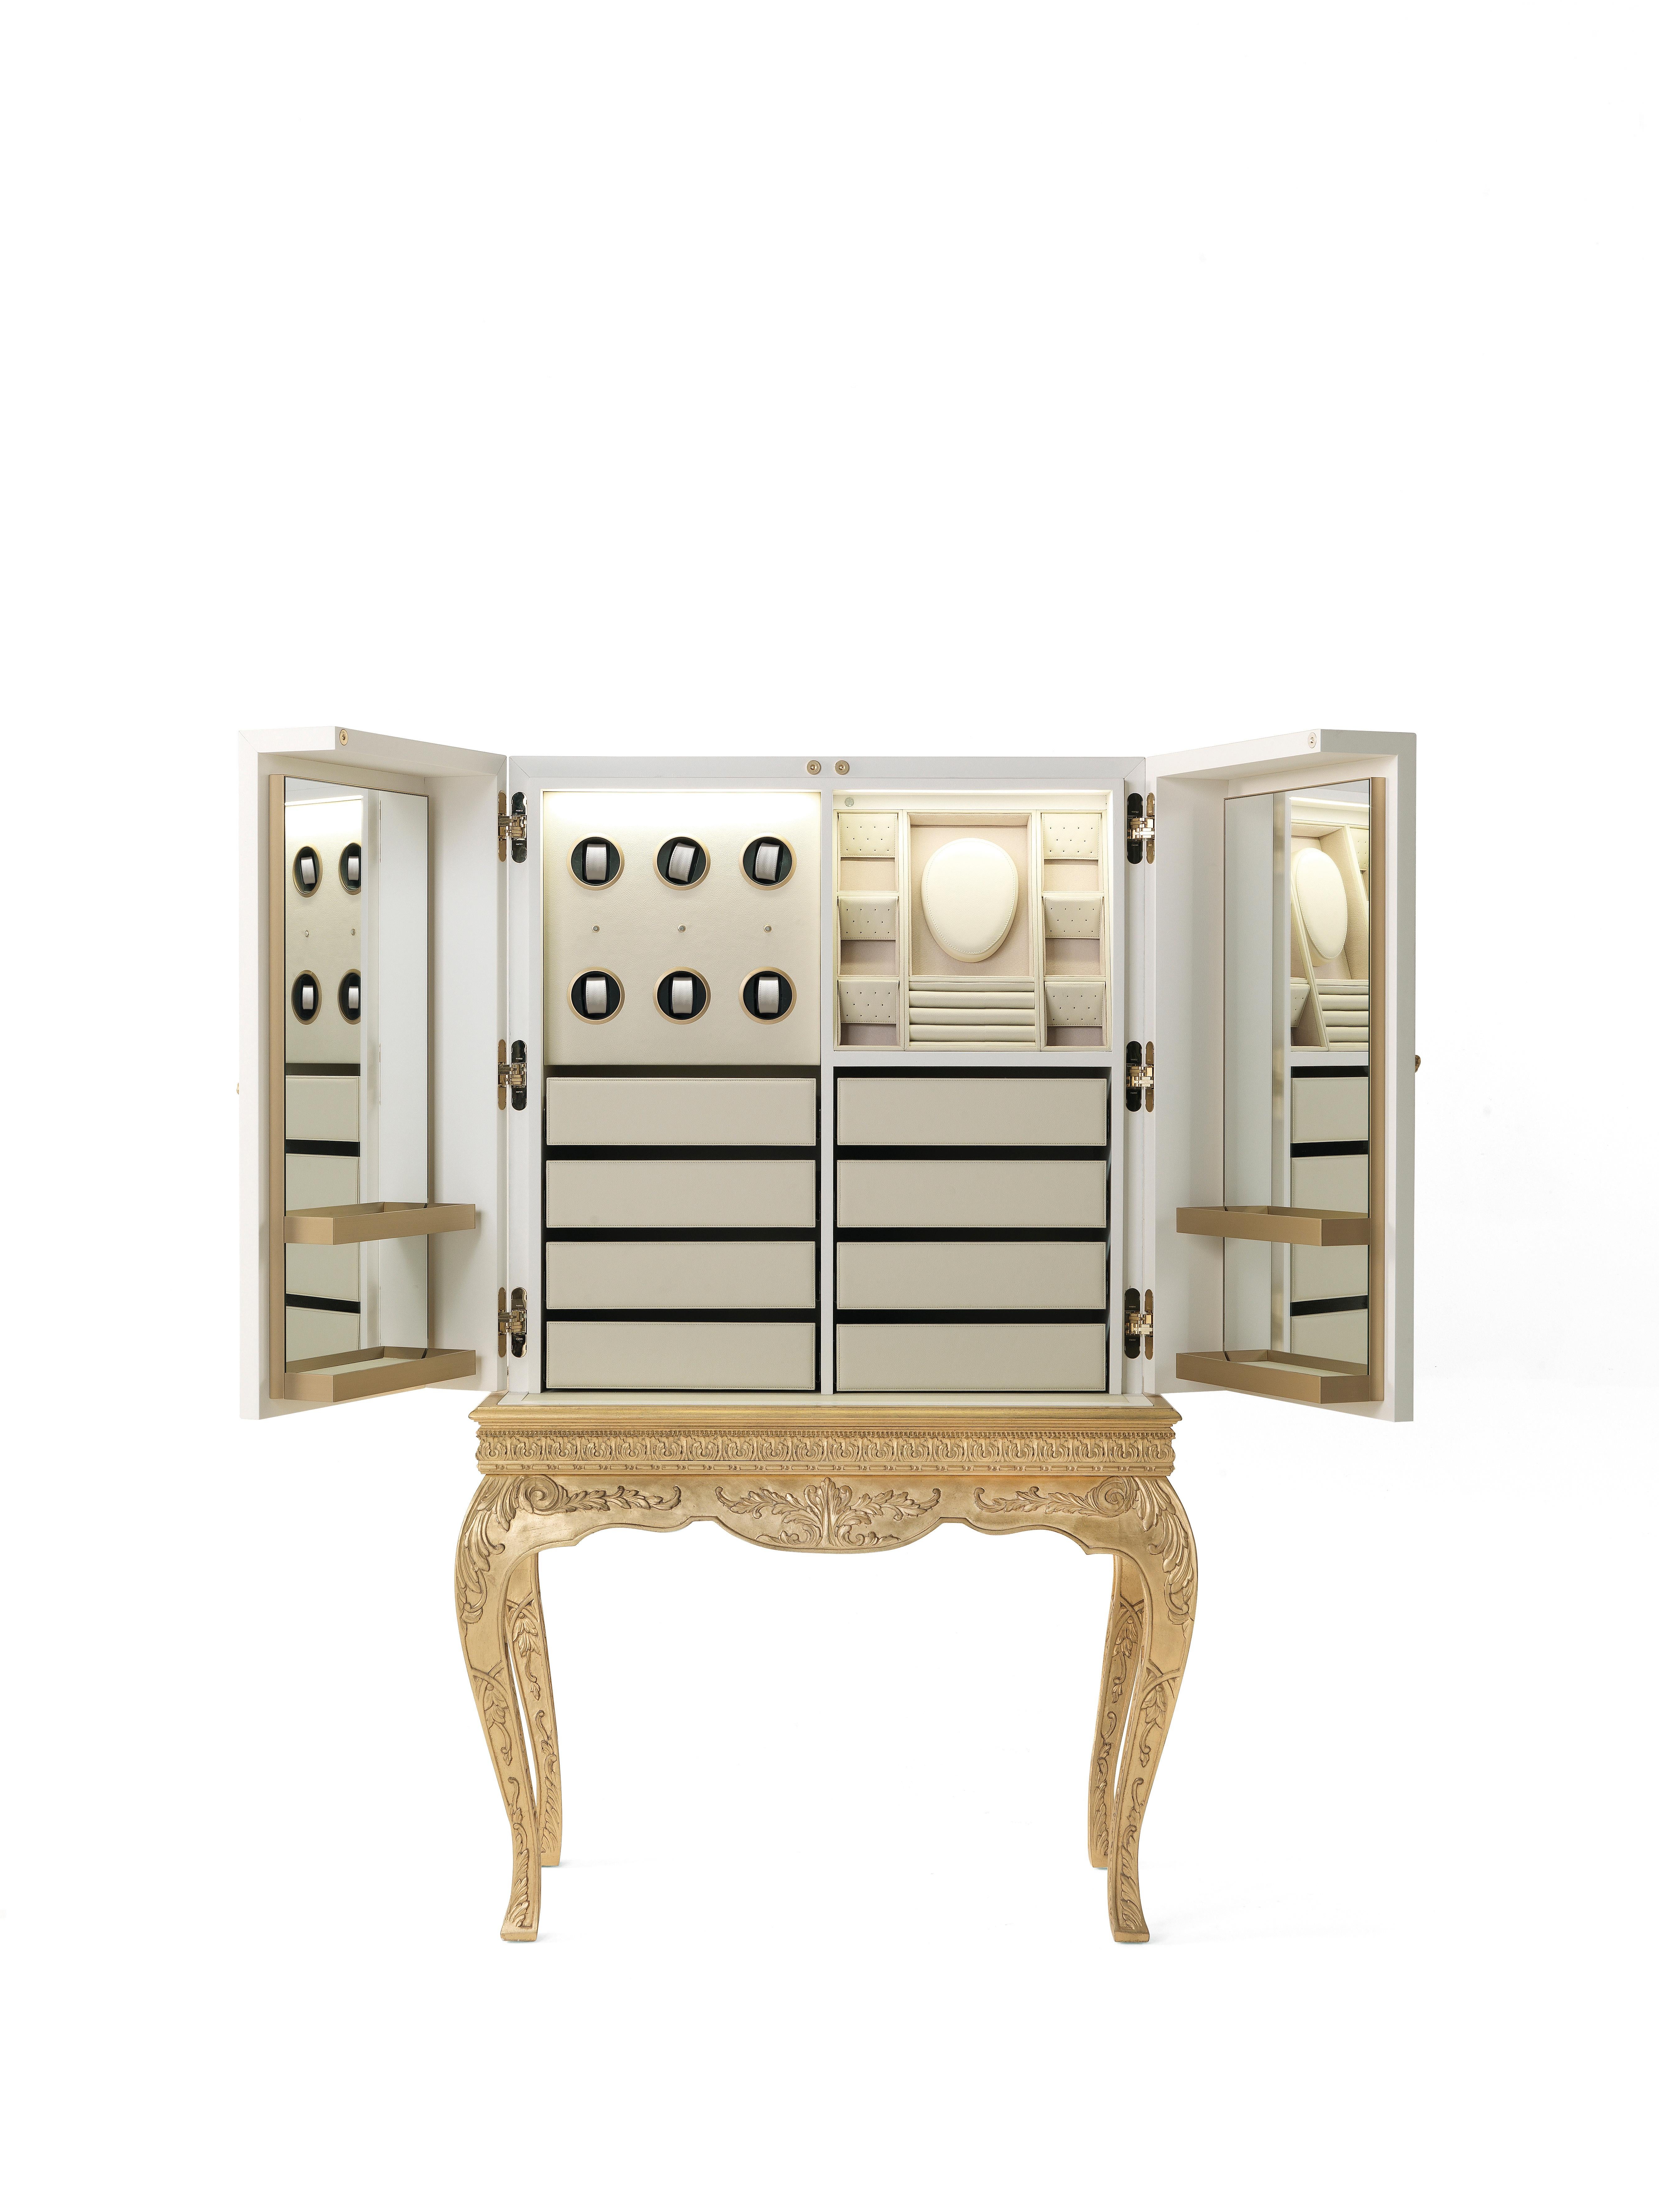 Italian 21st Century Brocart Jewel Cabinet with Gold Leaf Laser Engraved Lace Decoration For Sale